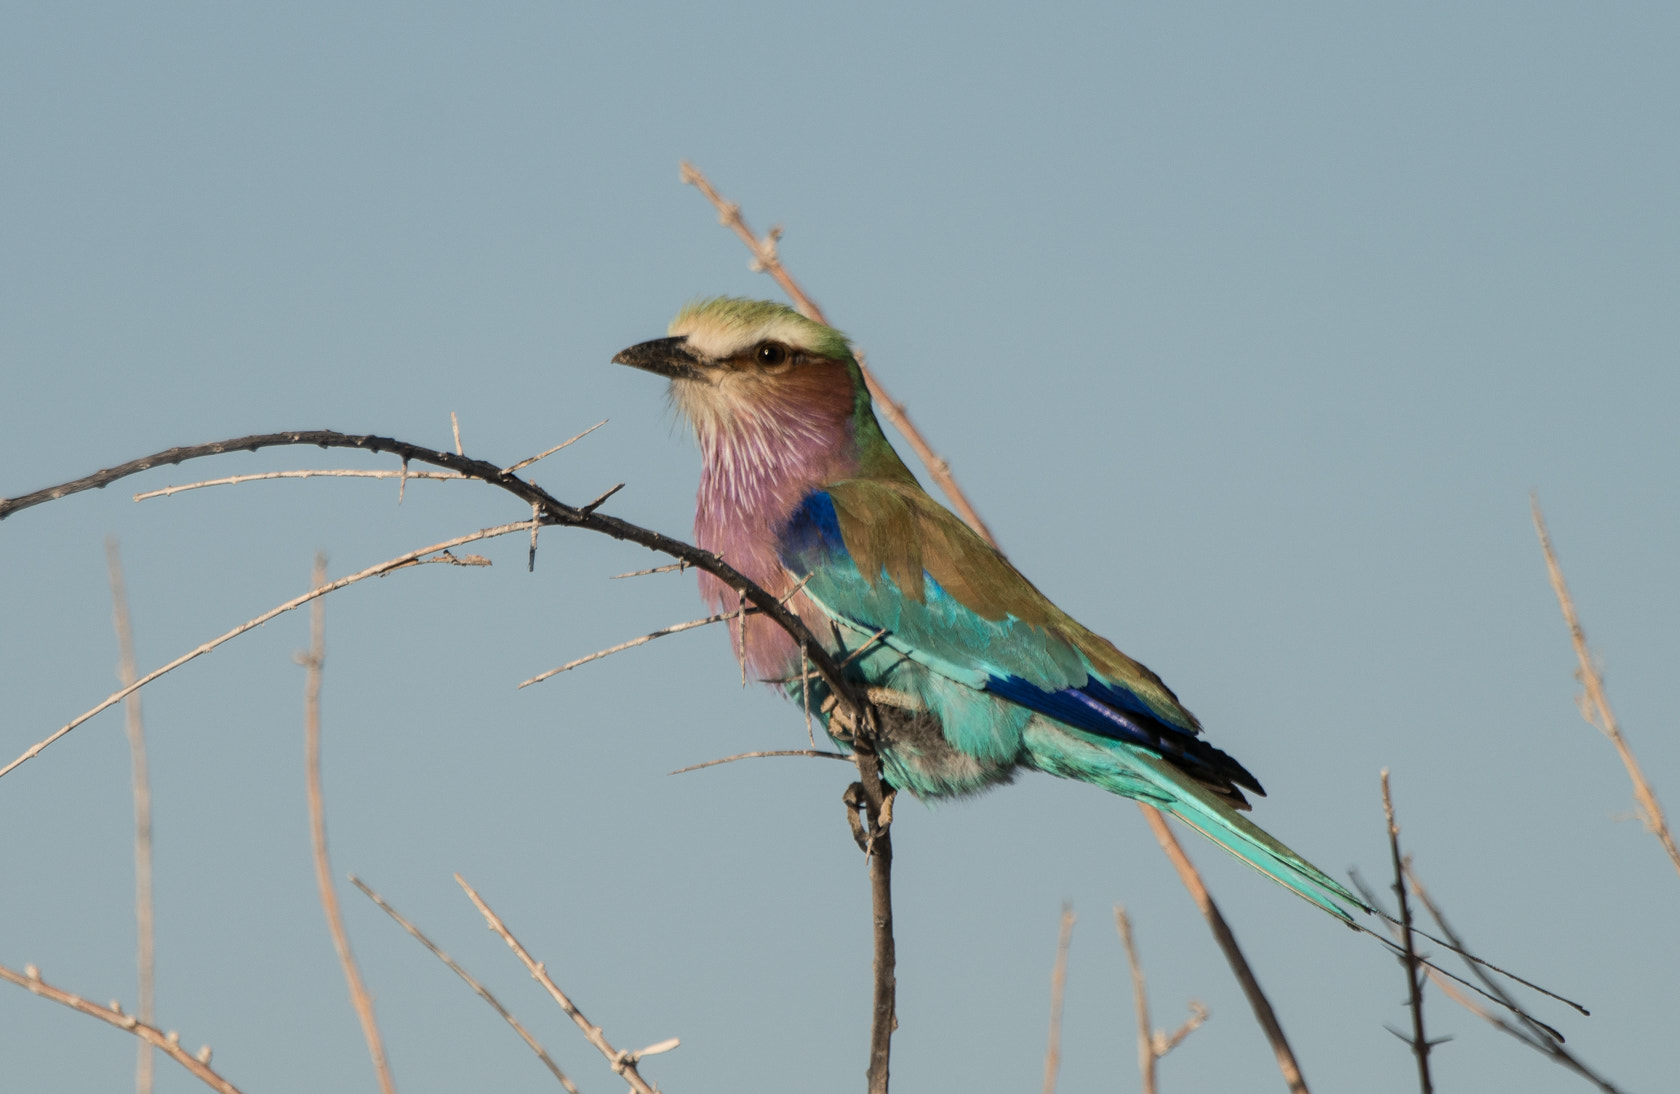 Sony a6300 sample photo. Lilac breasted roller, namibia photography